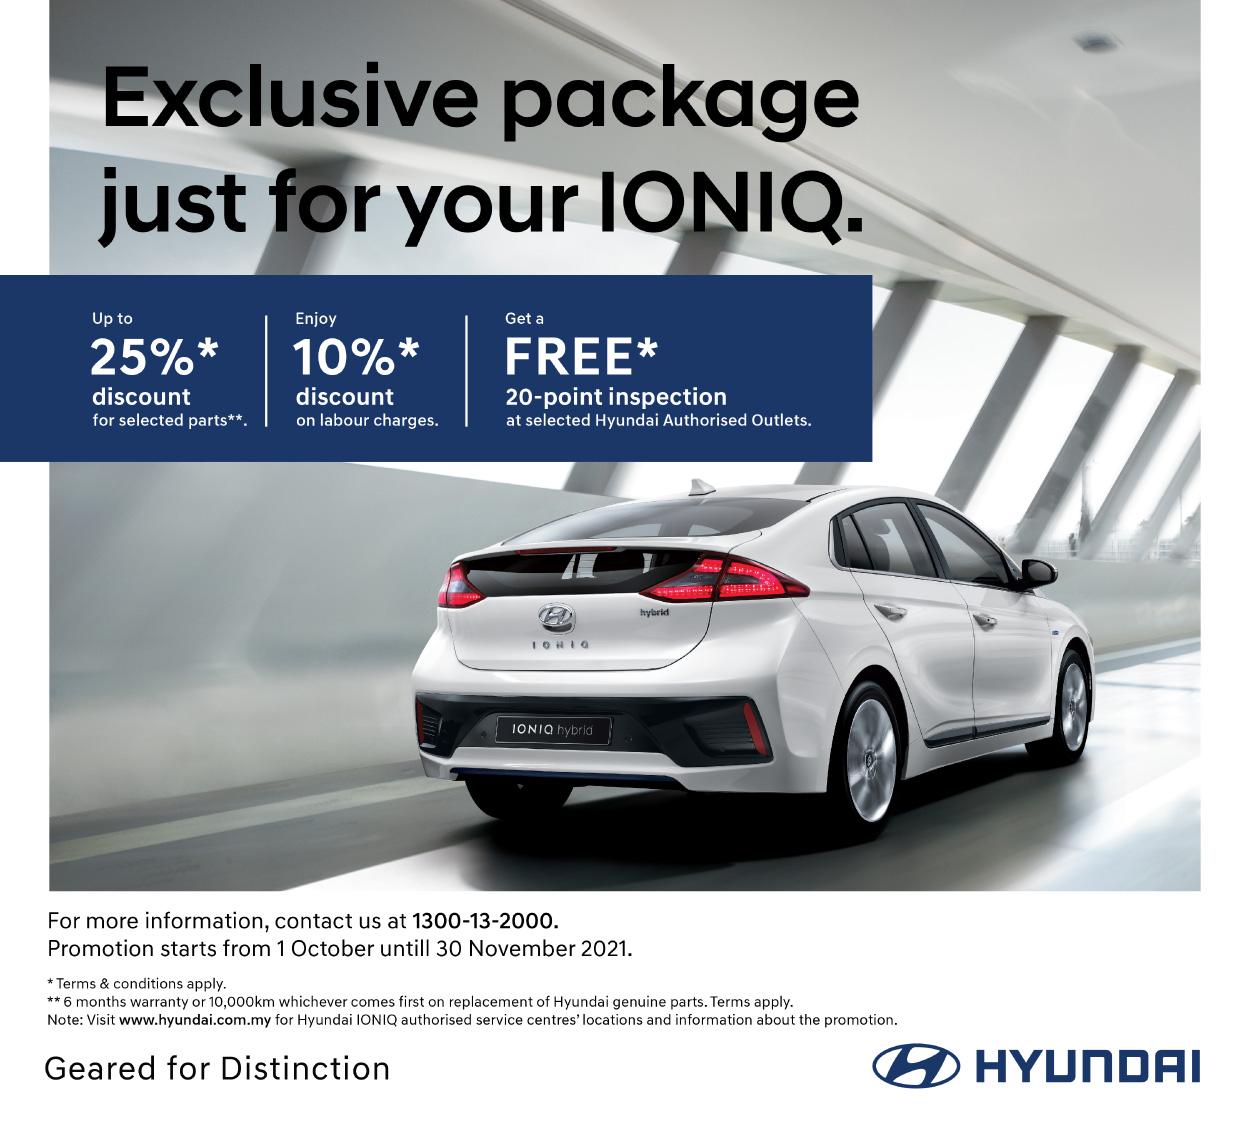 Exclusive package just for your IONIQ. Up to 25%* discount for selected parts**. Enjoy 10%* discount on labour charges. | Get a FREE* 20-point inspection at selected Hyundai Authorised Outlets. 6 months warranty or 10,000km whichever comes first on replacement of Hyundai genuine parts. For more information, contact customer careline at 1300-13-2000. Terms and Conditions apply.